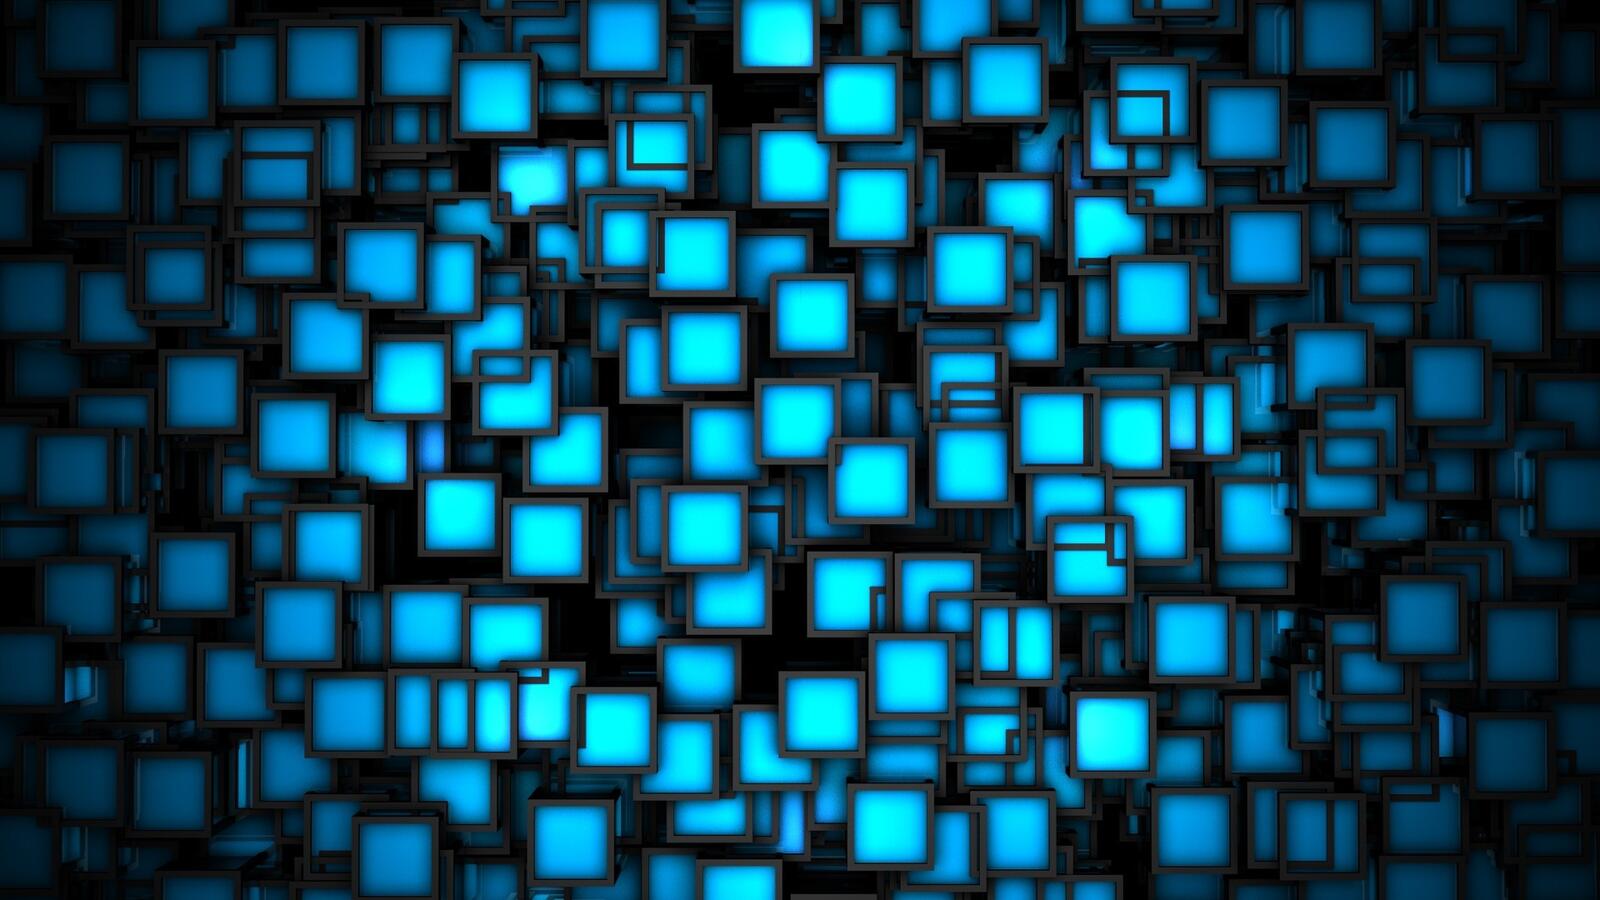 Free photo Rendering blue cubes with 3d effect